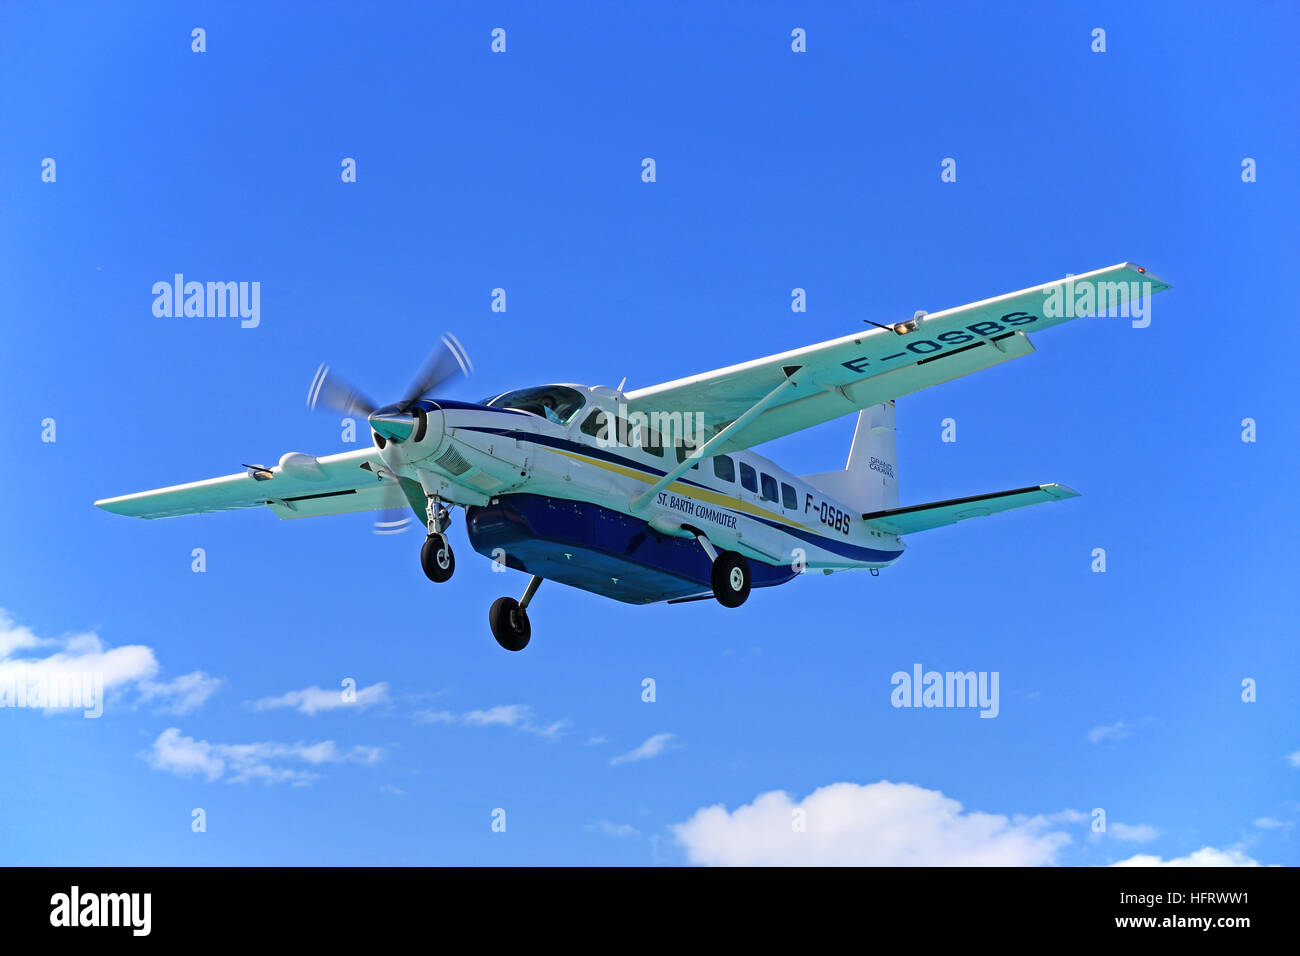 Cessna Grand Caravan 208B aeroplane operated by St Barth Commuter taking  off from Philipsburg Airport, St Maarten Stock Photo - Alamy